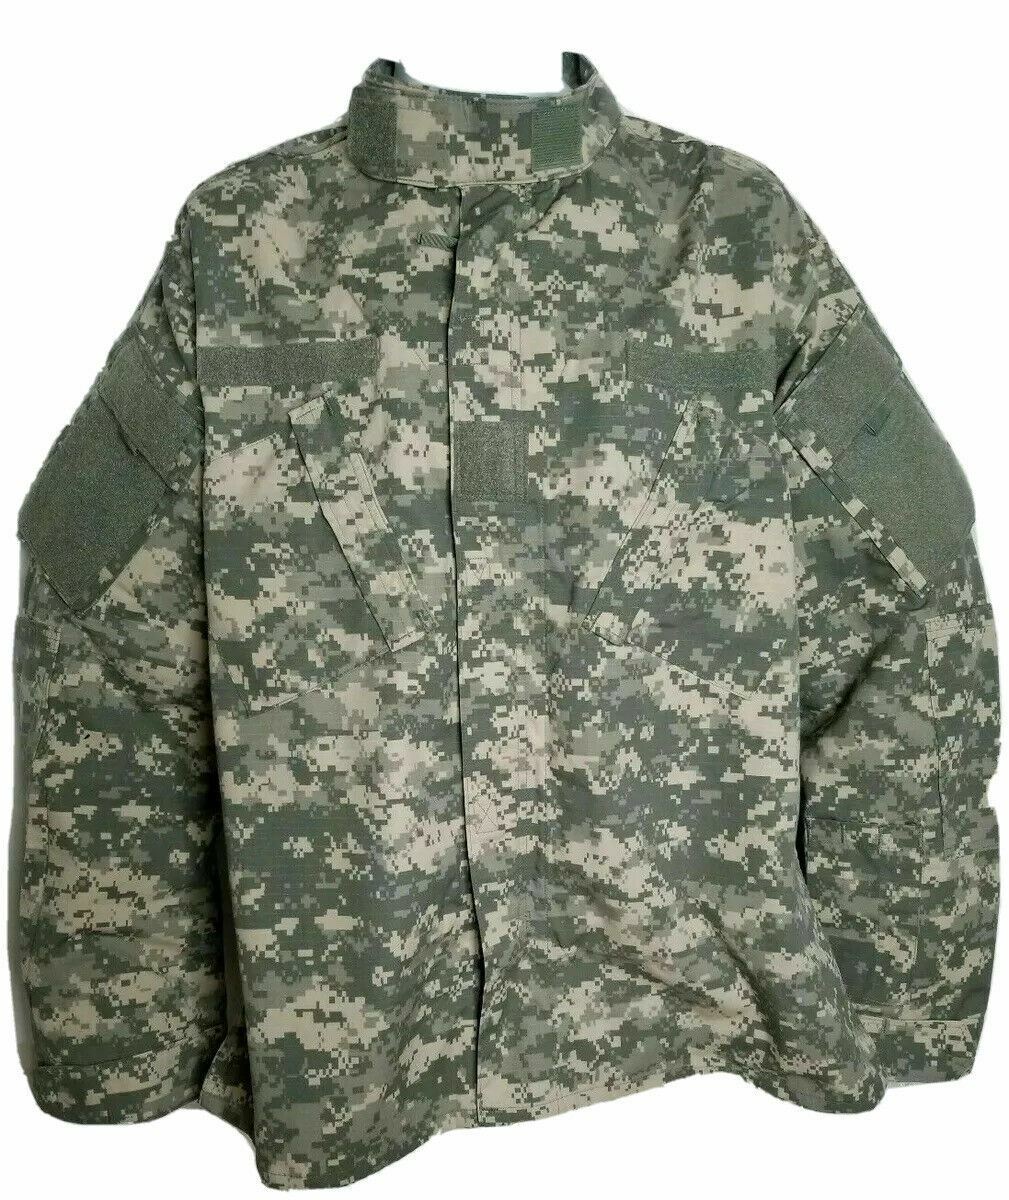 US Military ACU Digital Ripstop Camouflage Jacket (Size: M/R)